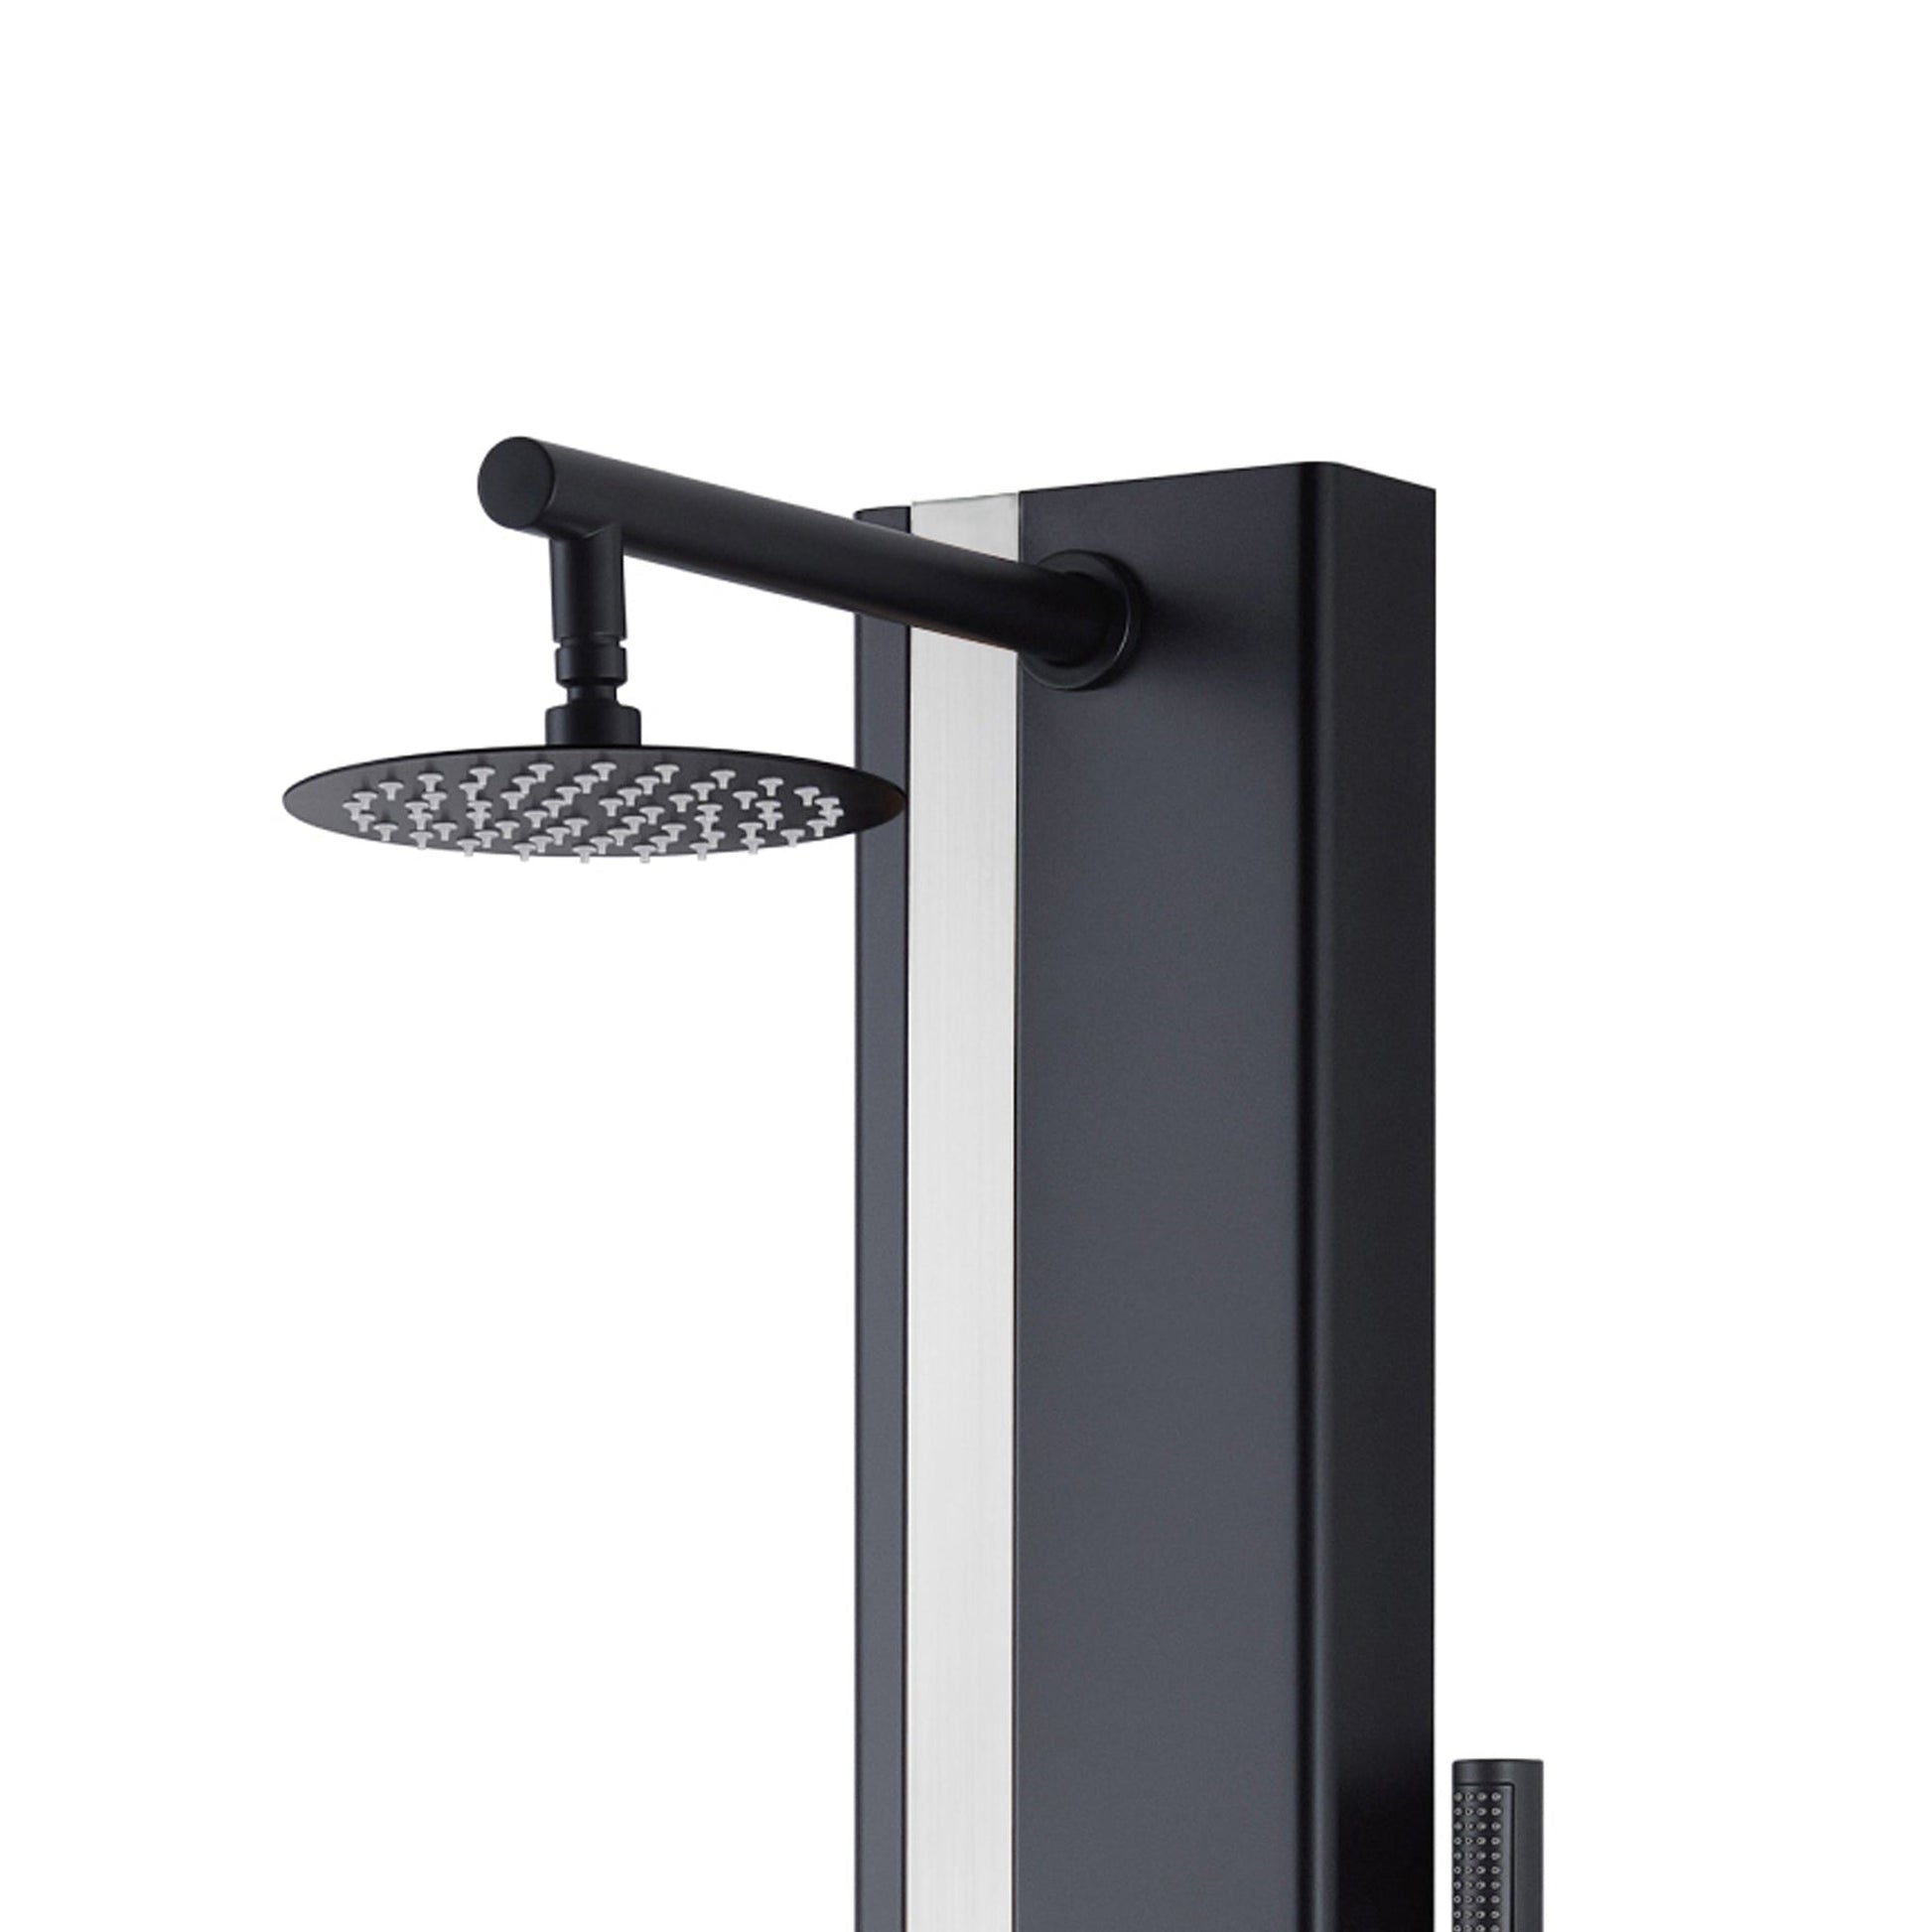 PULSE ShowerSpas Eclipse 57" Rain Shower Panel 1.8 GPM in Matte Black and Brushed Stainless Steel Finish With 4-Body Jet and Handheld Shower